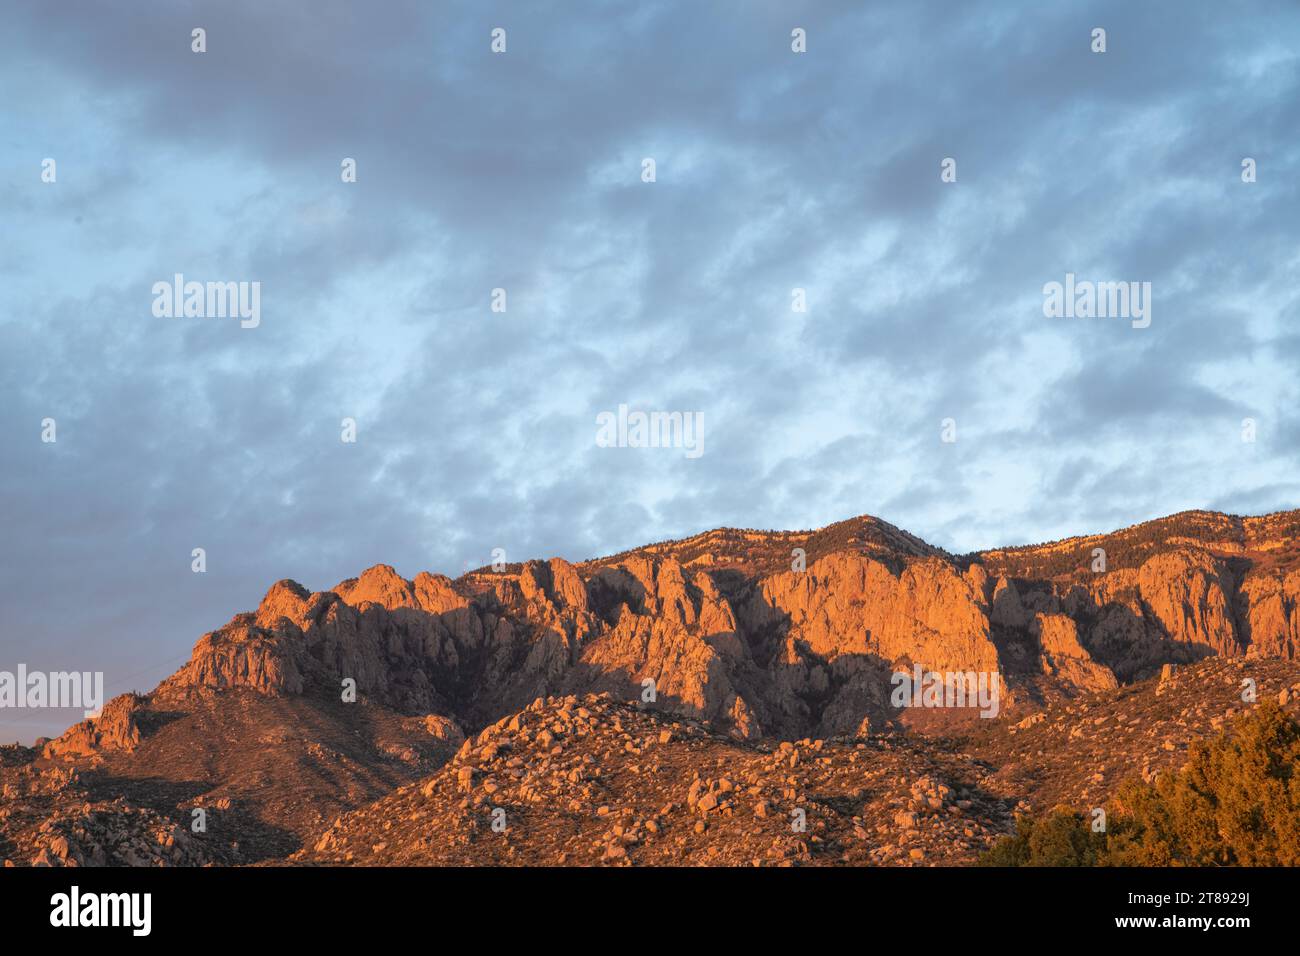 The Sandia Mountains illuminated by the light of the setting sun, casting the rocks in orange and pink colors, with a light sky with high, thin clouds Stock Photo